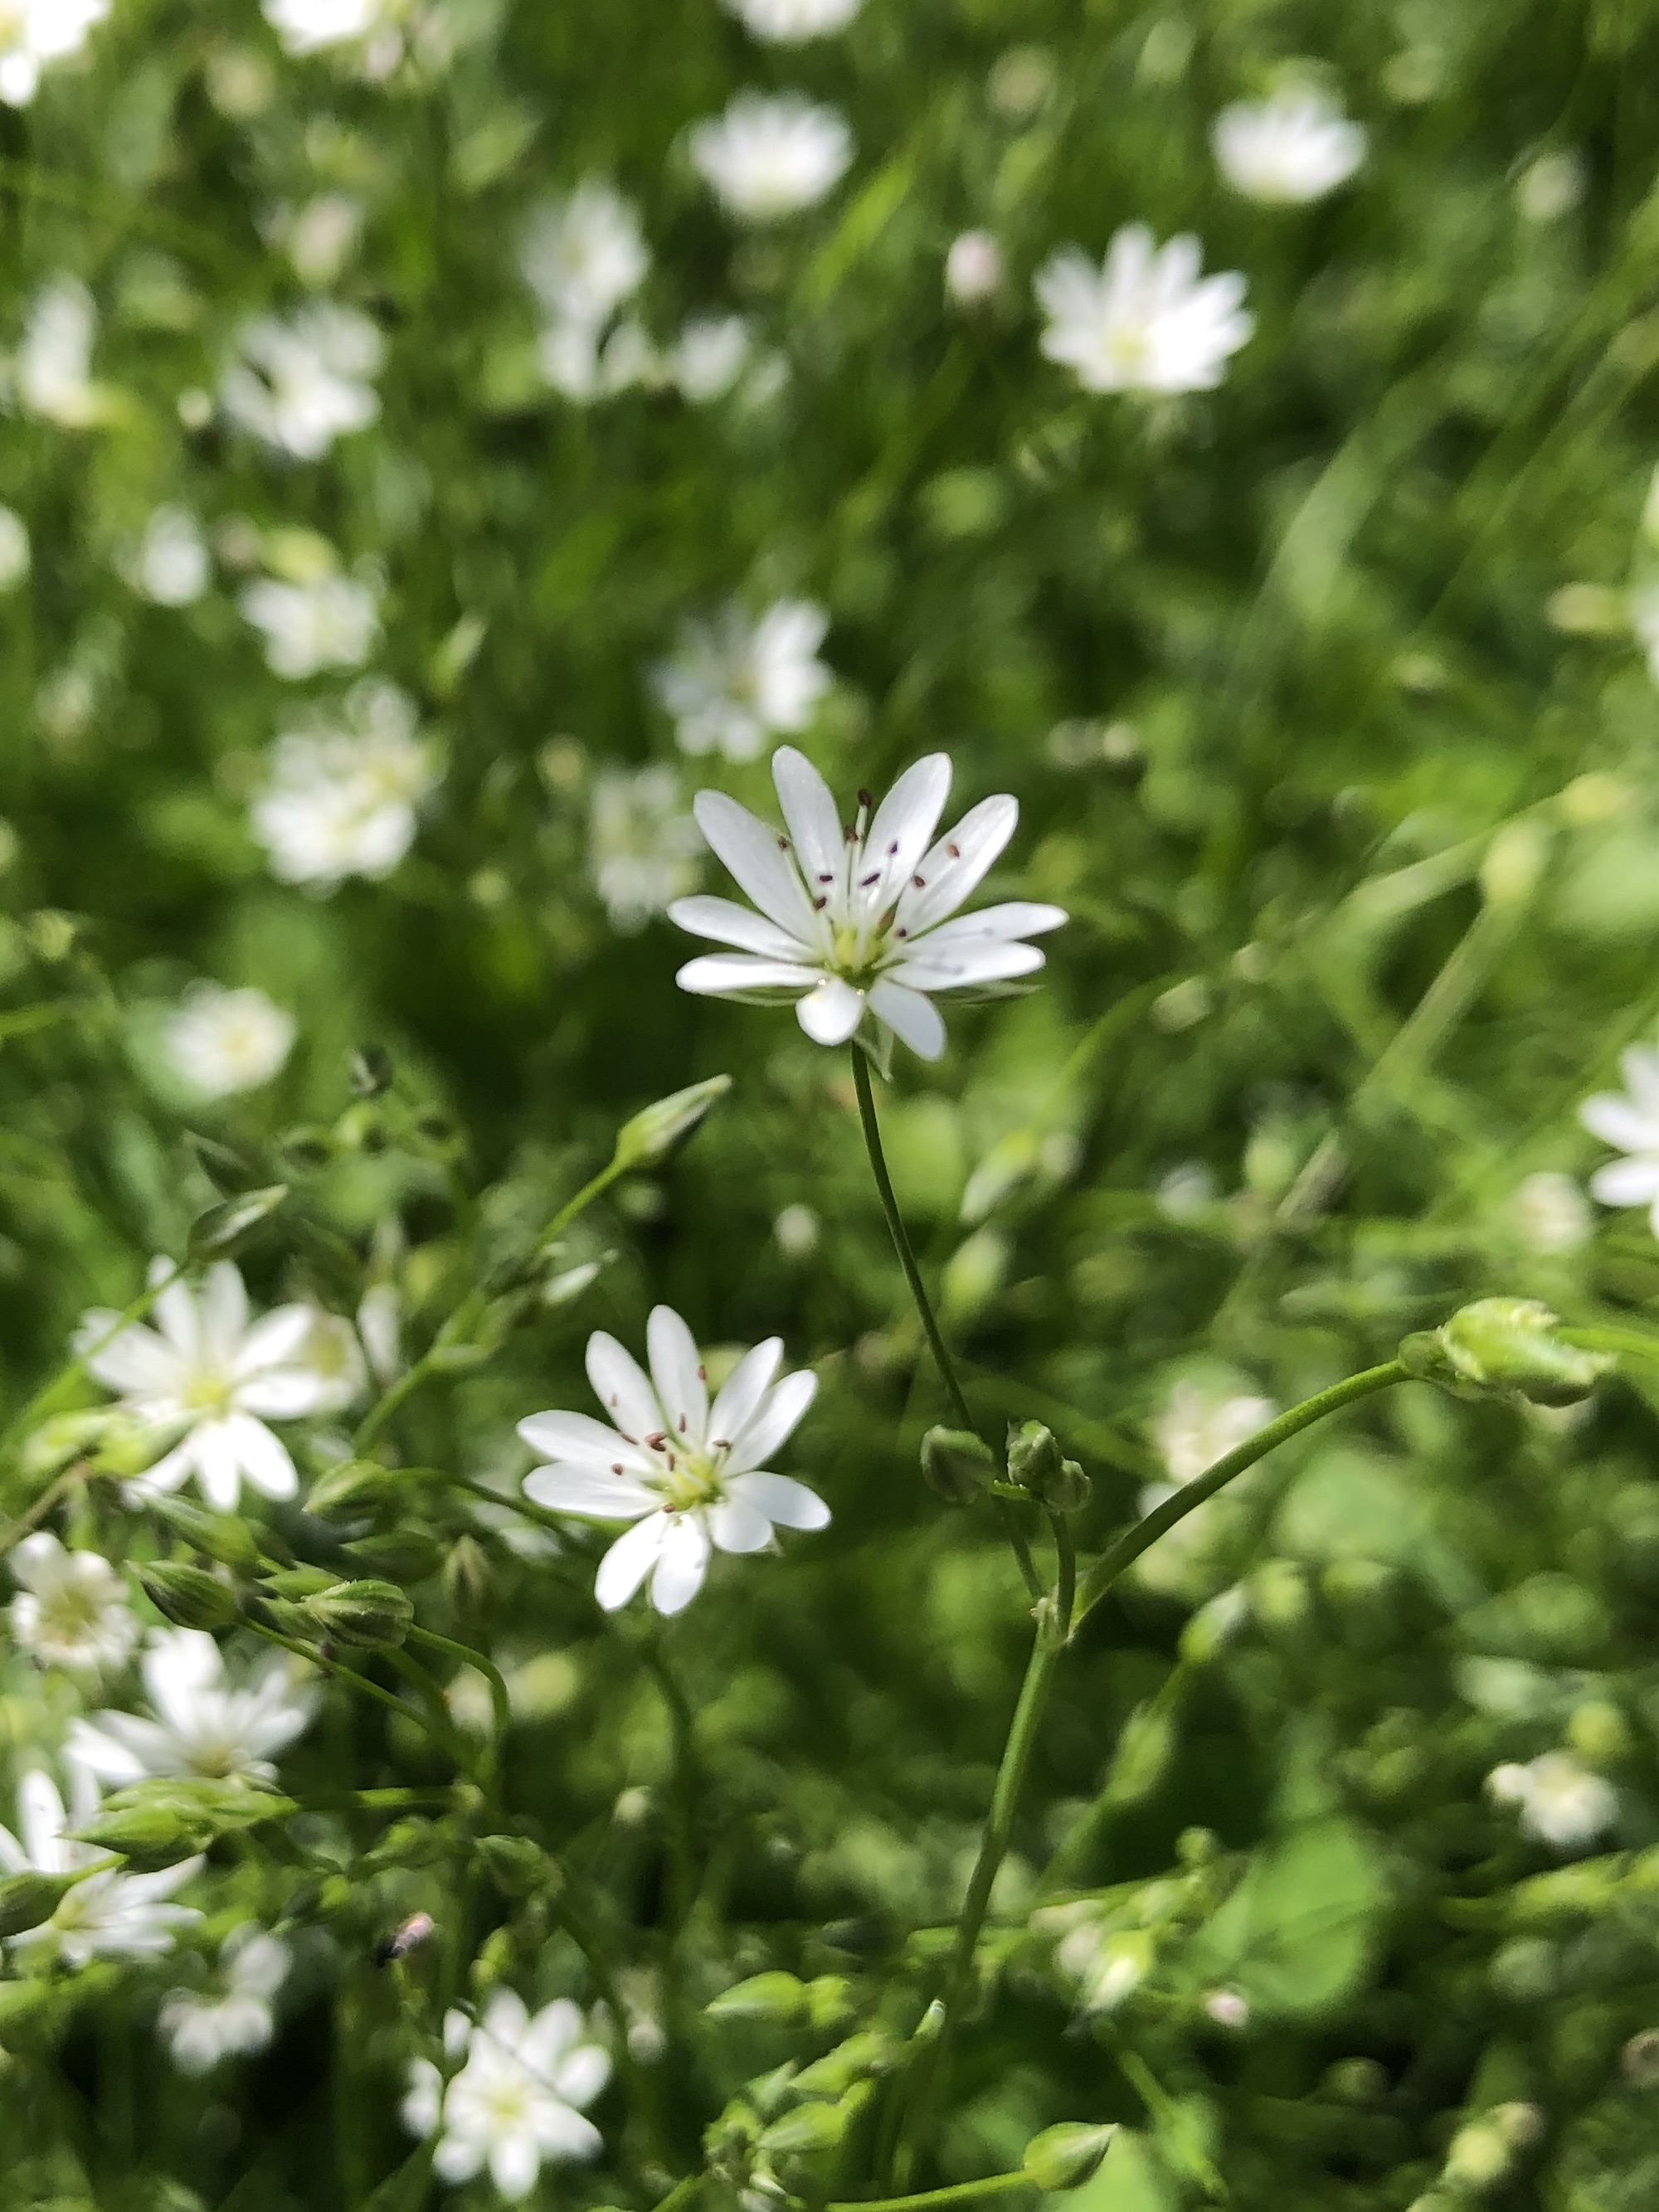 Common Stitchwort in a grassy clearing along the bike path between Odana Road and Midvale Boulevard in Madison, Wisconsin on June 3, 2022.